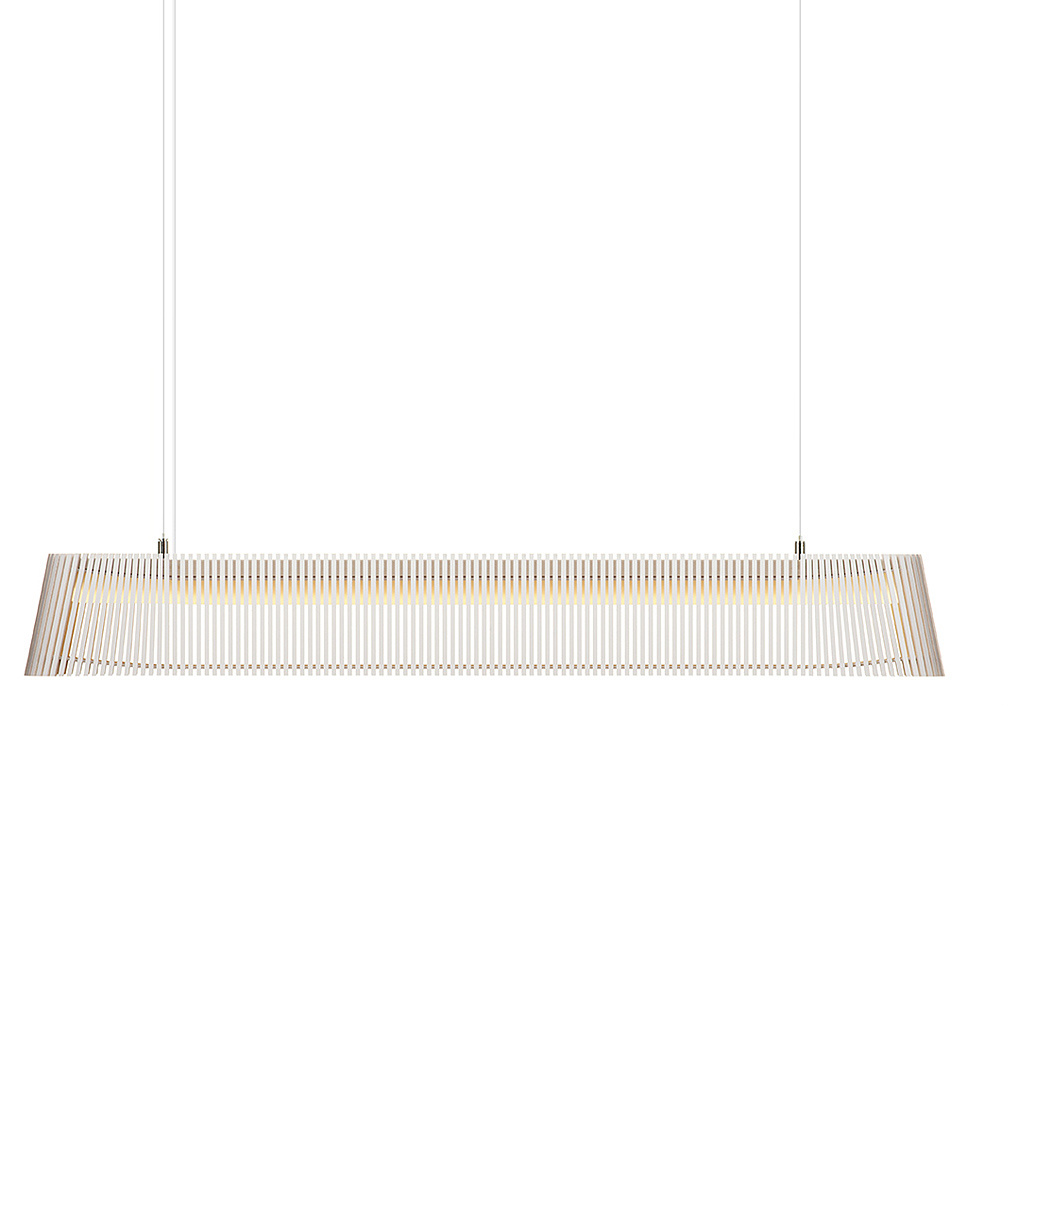 Owalo 7000 pendant is available in white laminated